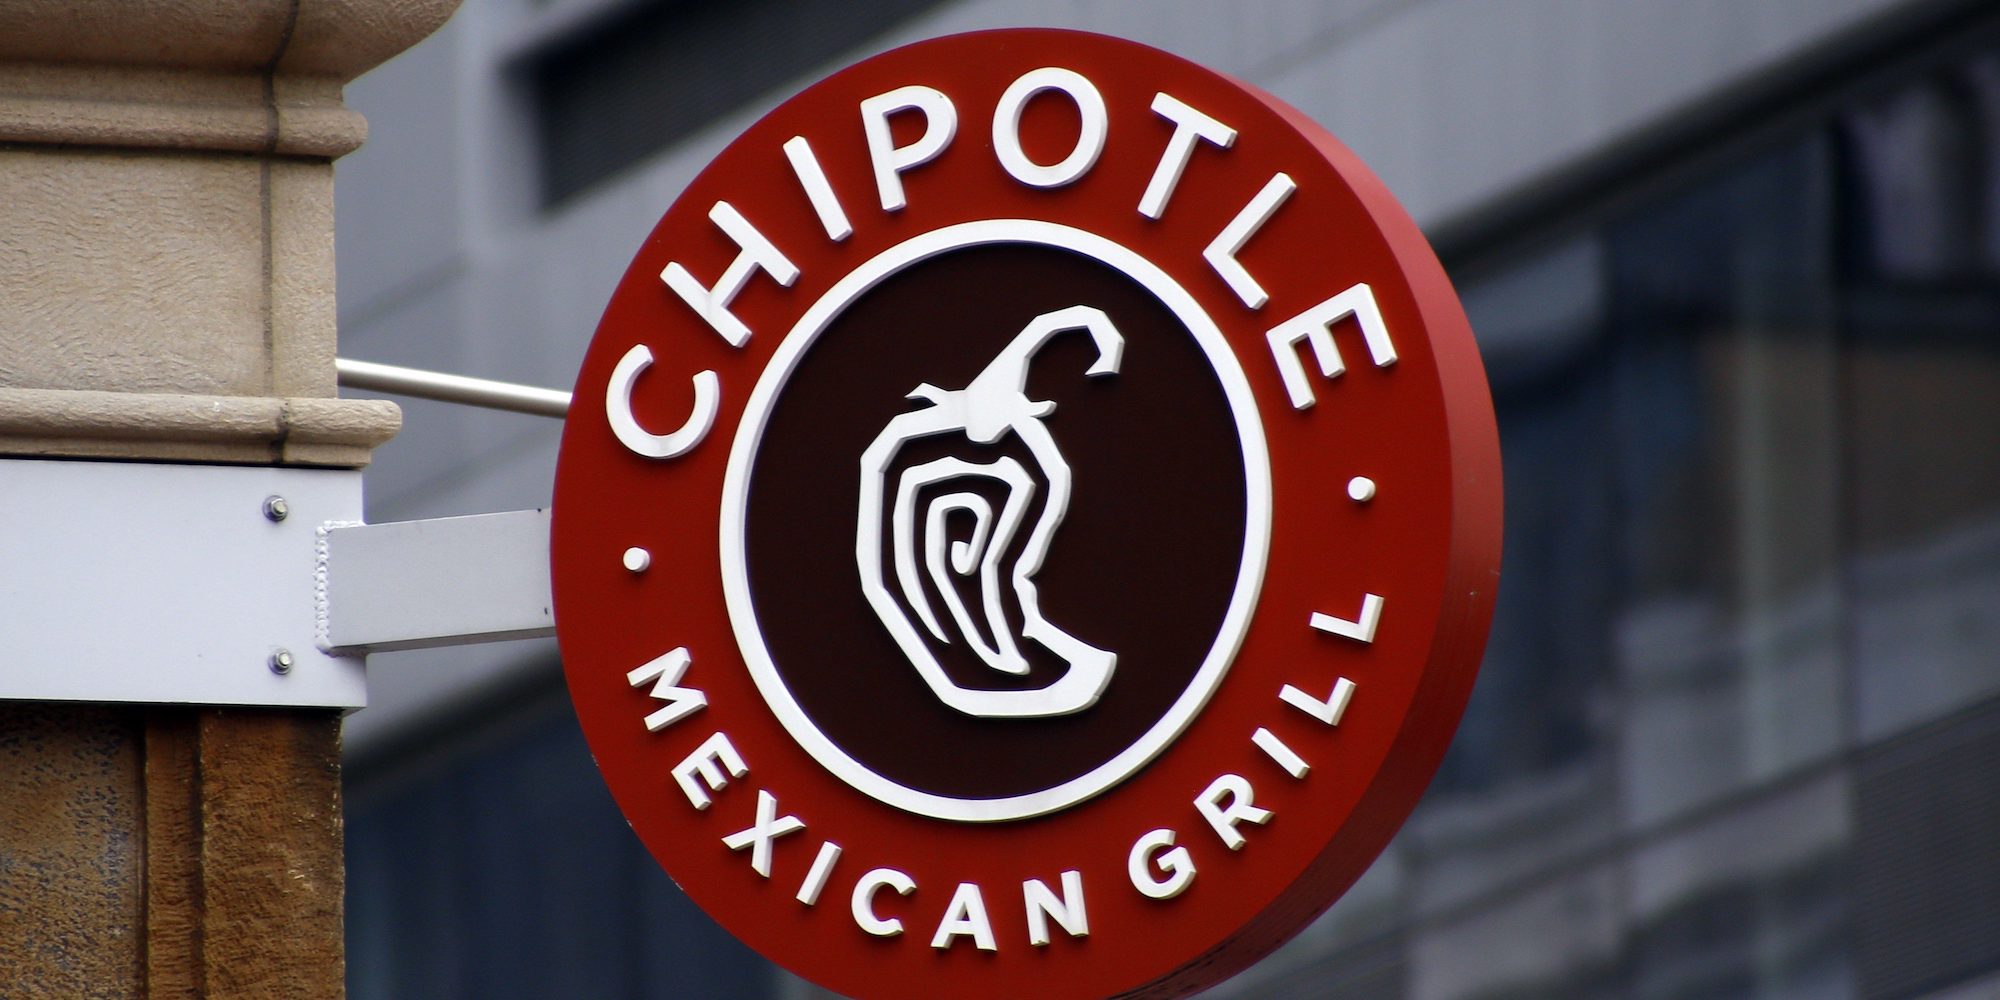 Don't pay full price at Chipotle 15 gift card for 10 (33 off